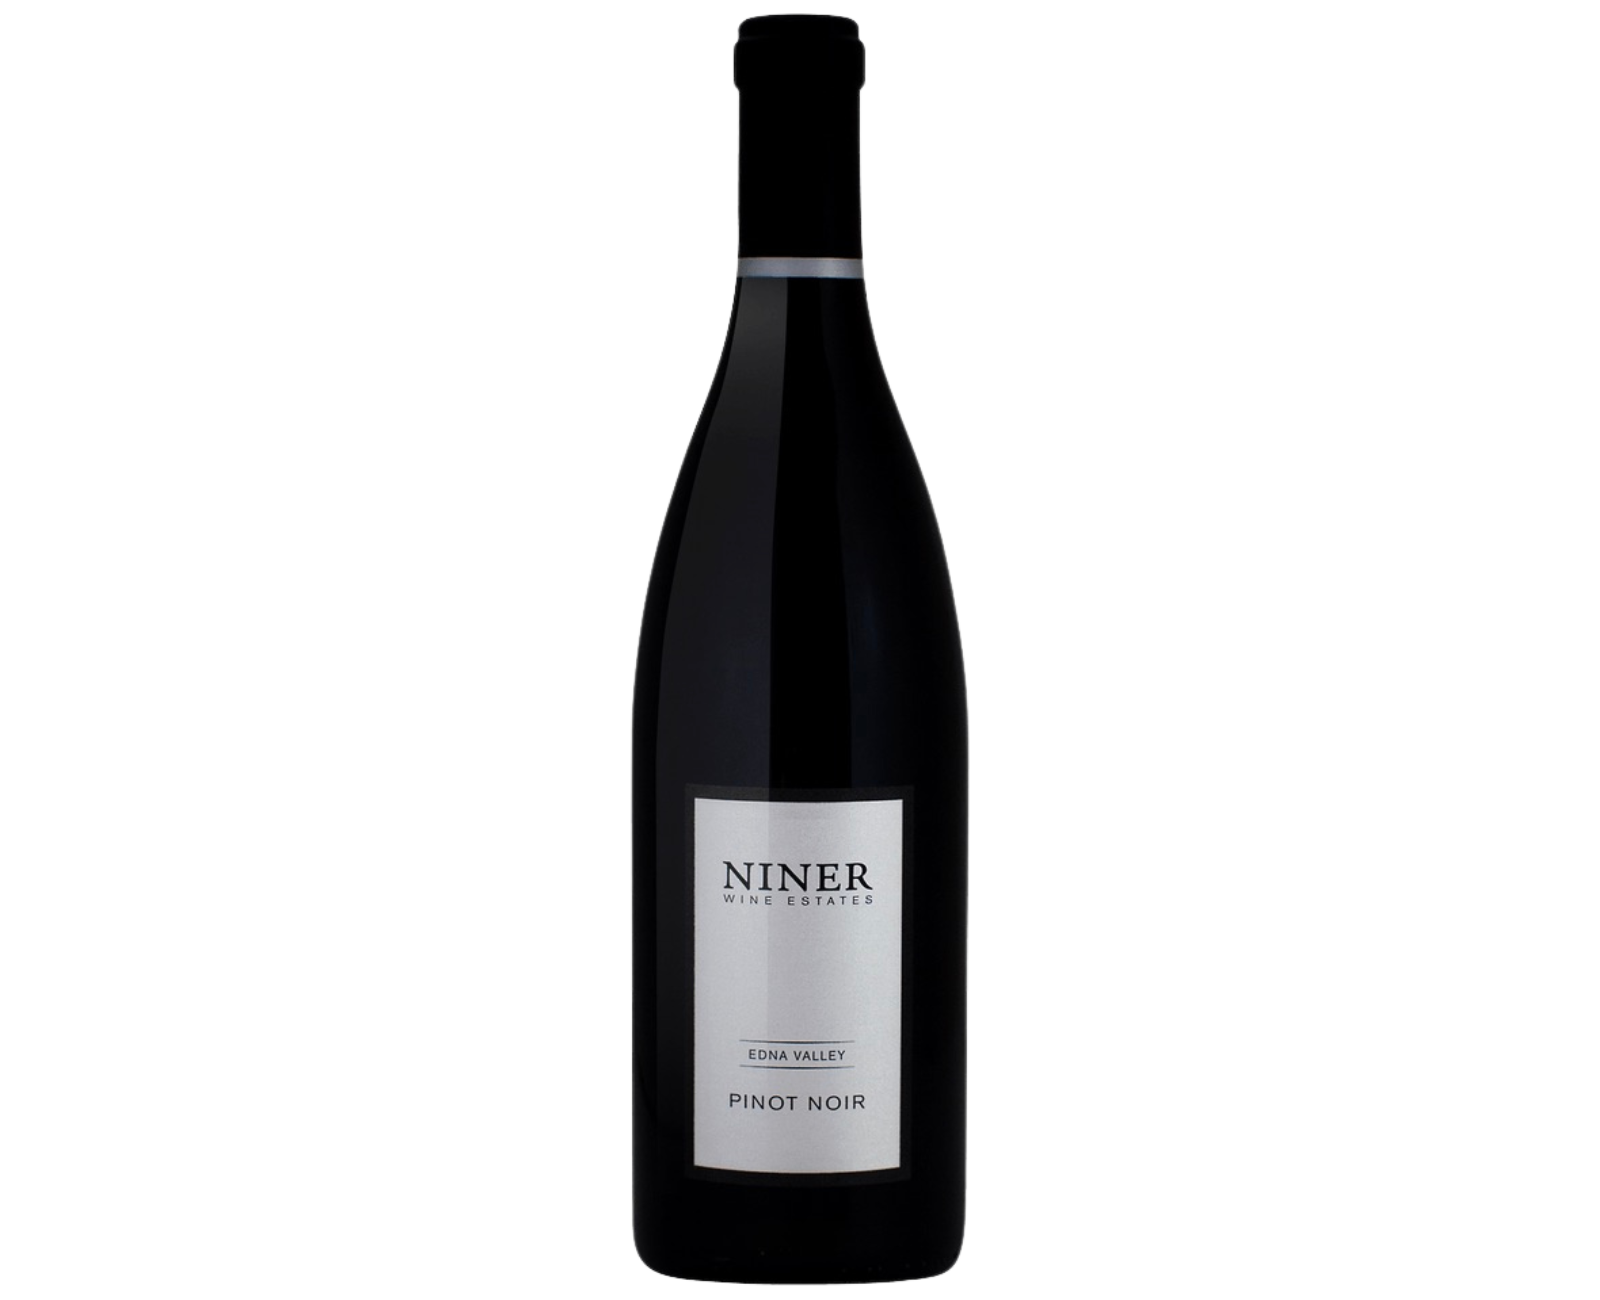 Niner 2021 Pinot Noir, Paso Robles